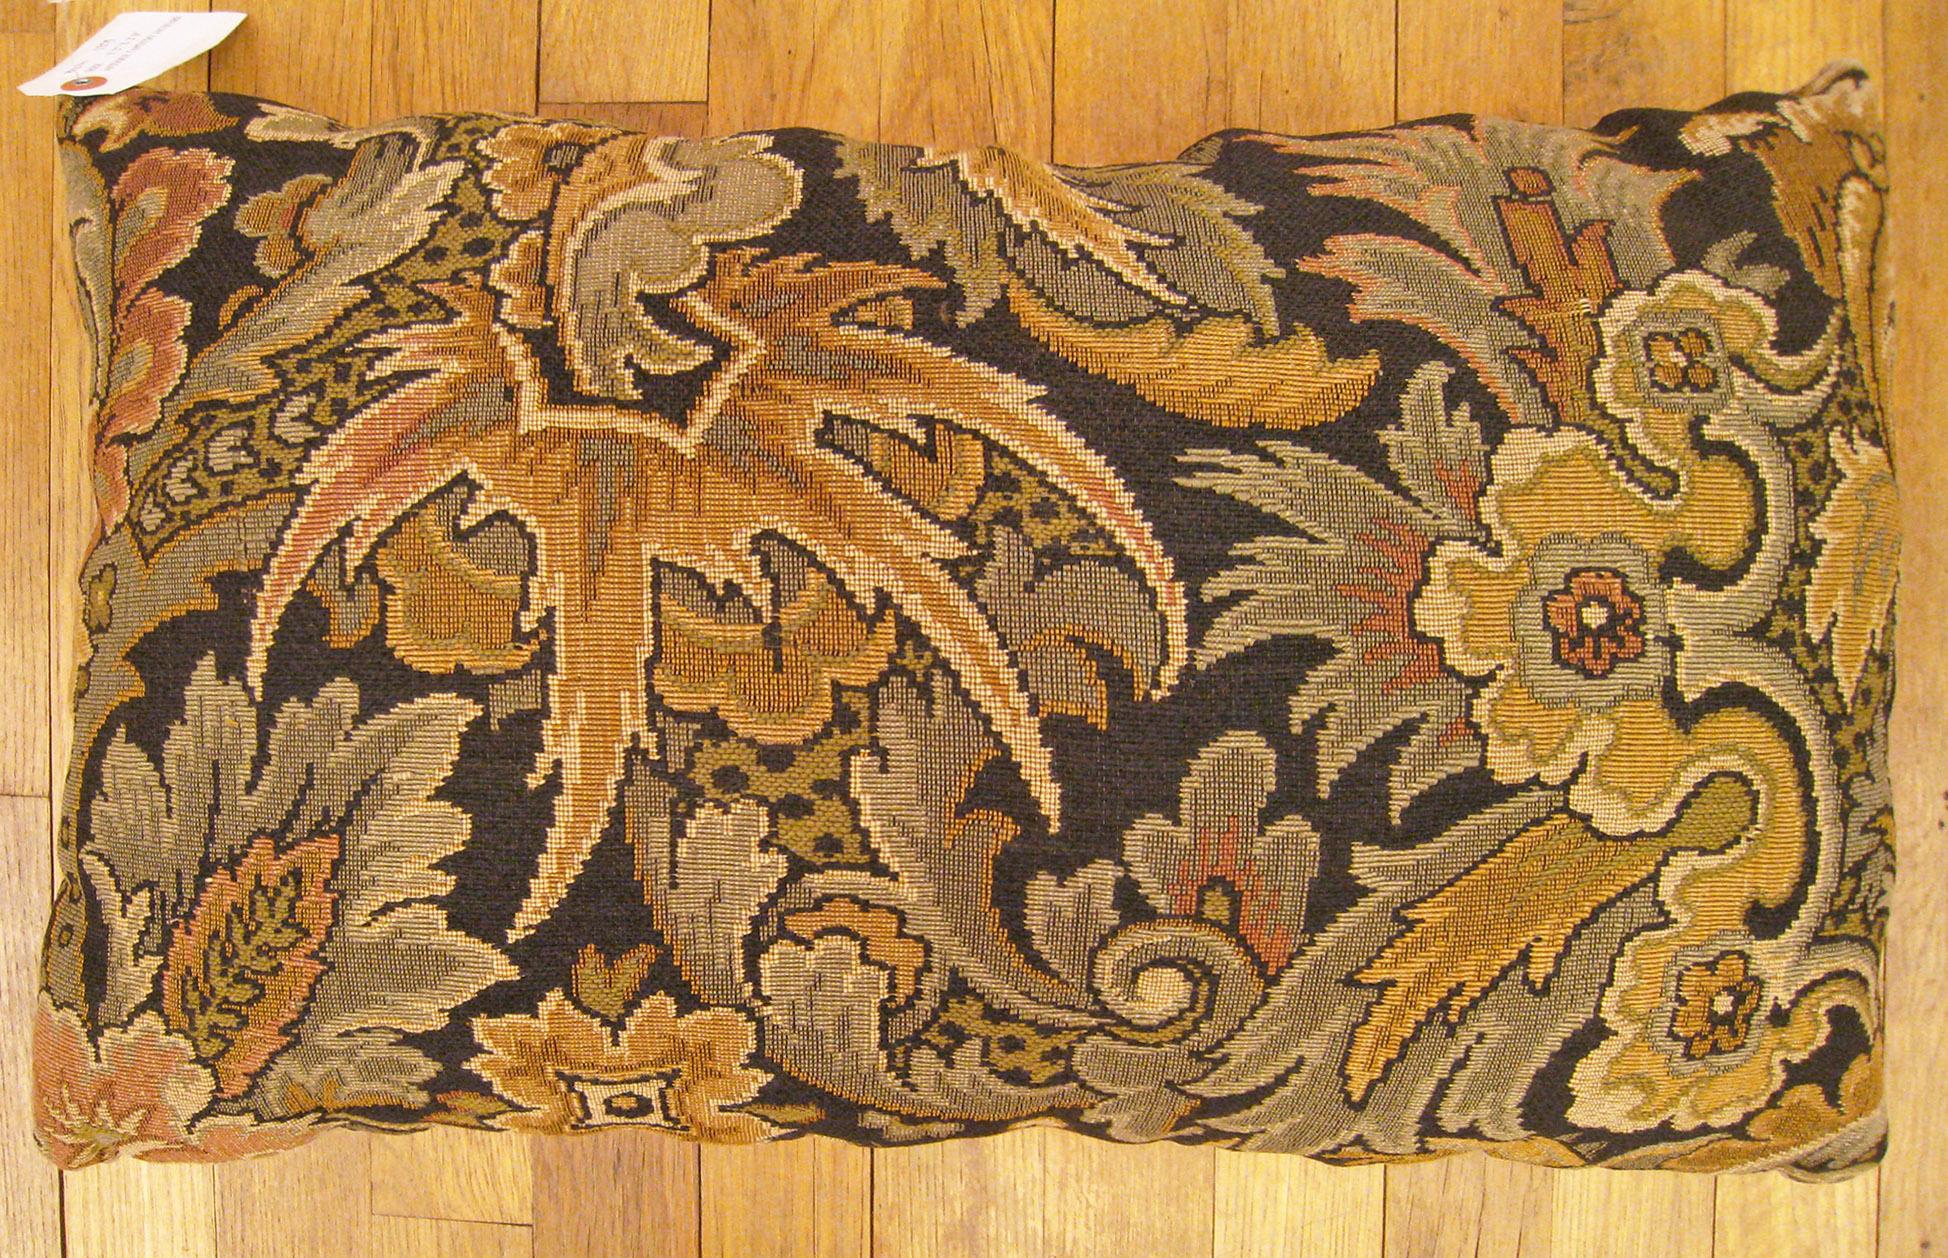 Antique Jacquard Tapestry pillow ; size 1'2” x 2'0”.

An antique decorative pillows with floral elements allover a gold green central field, size 1'2